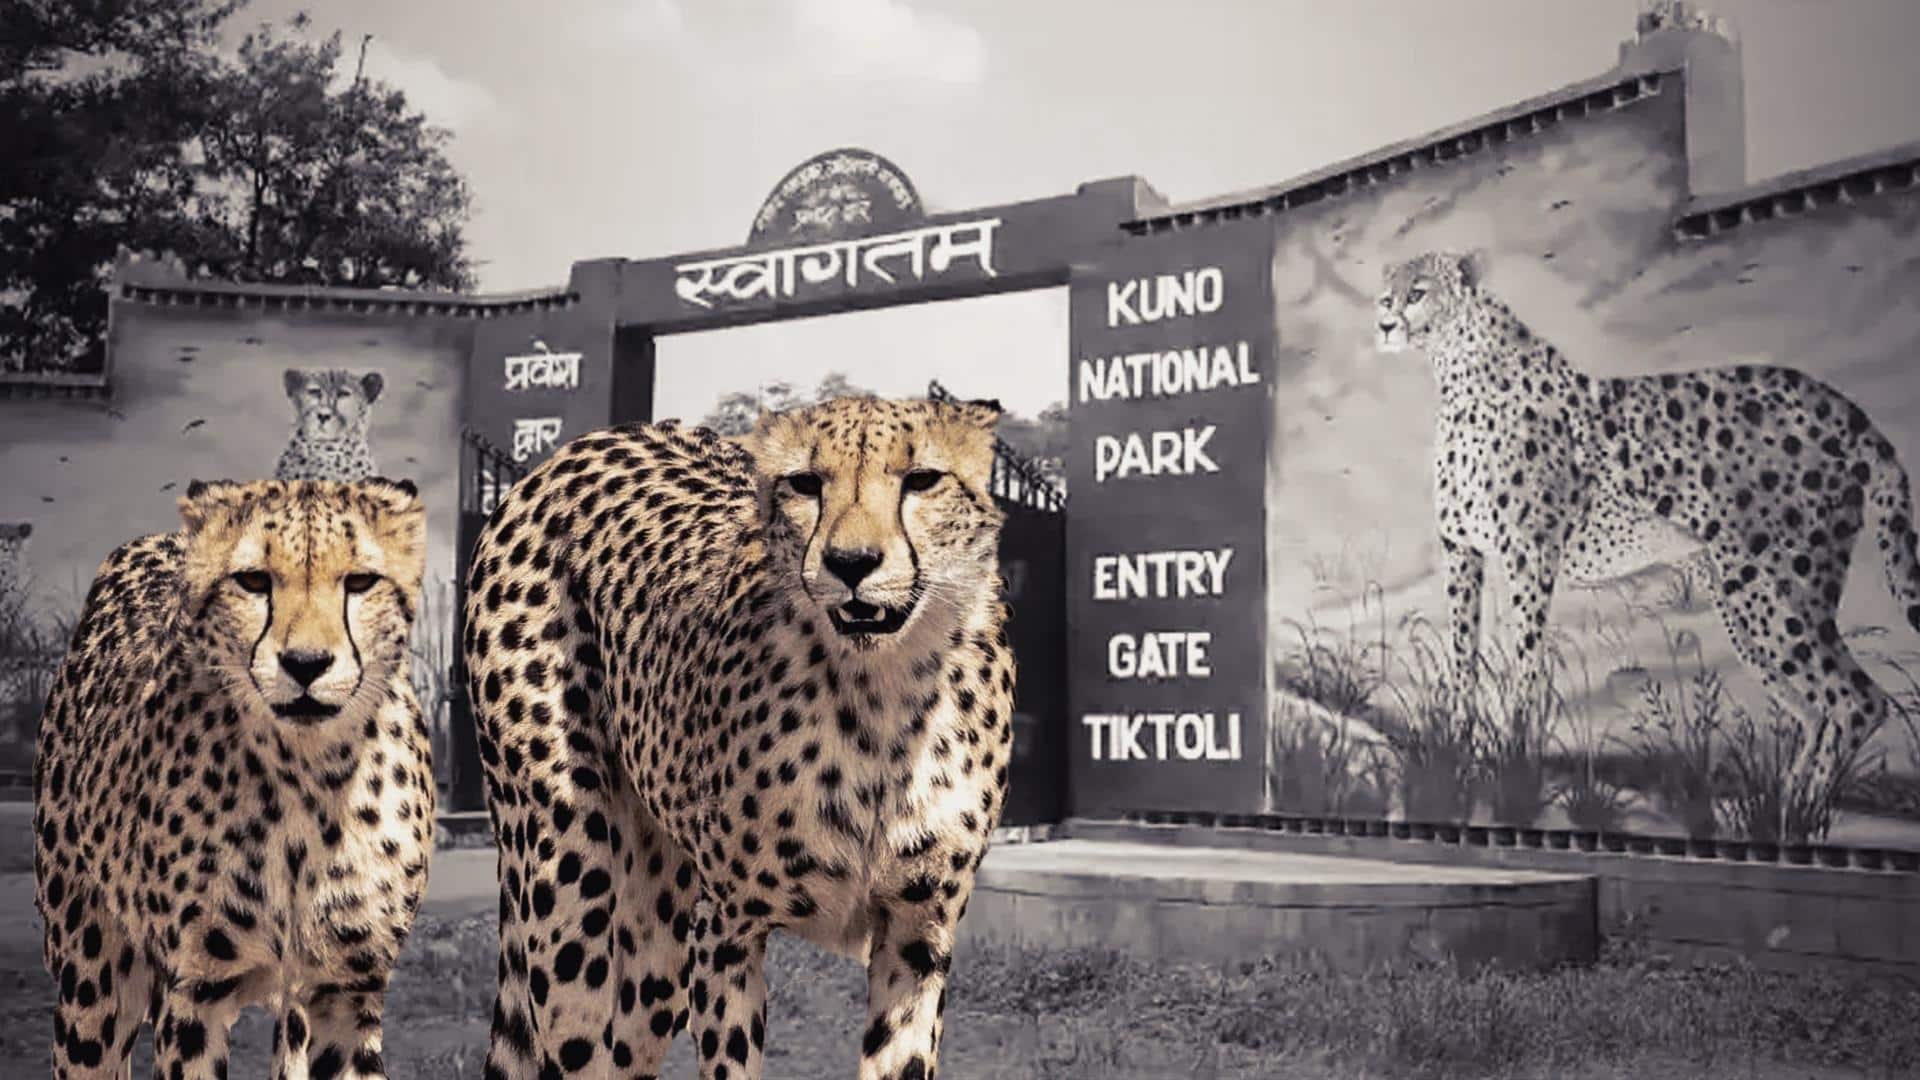 MP minister unhappy over cheetahs being shifted in his absence